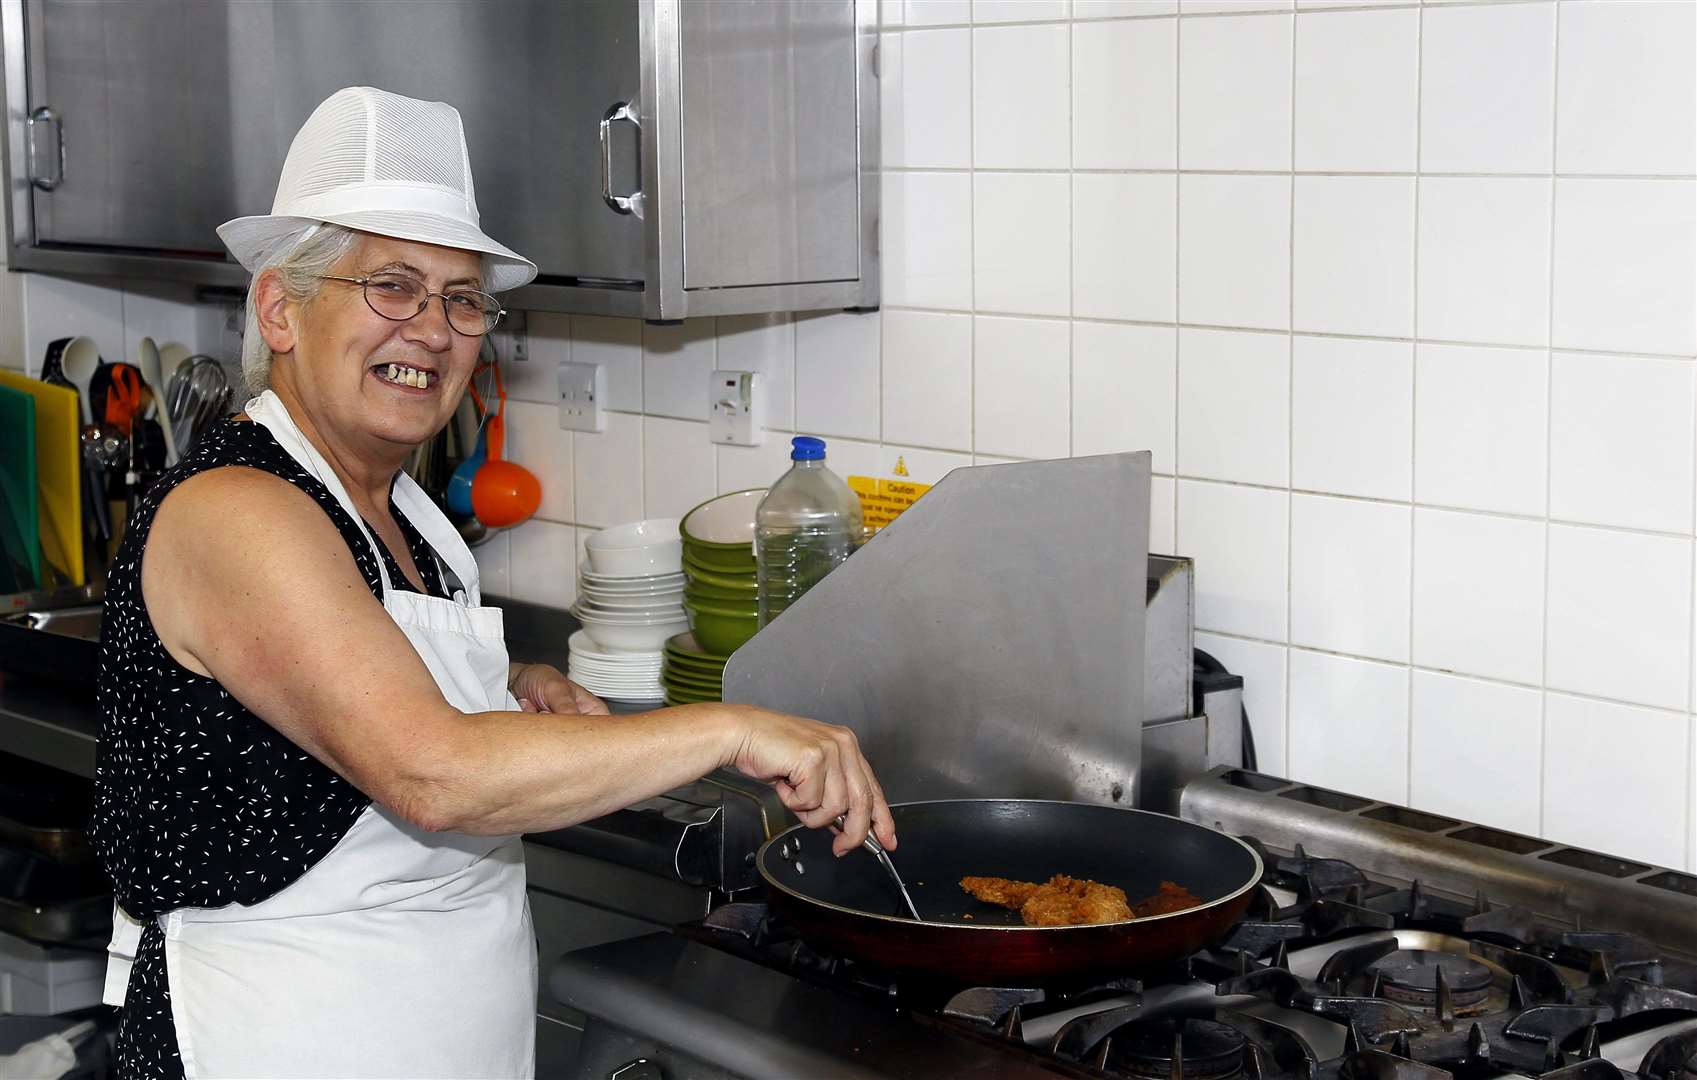 Dee cooks at Maidstone Day Centre, which received more than three vans full of donations from Supermarket Sweep. Picture: Sean Aidan